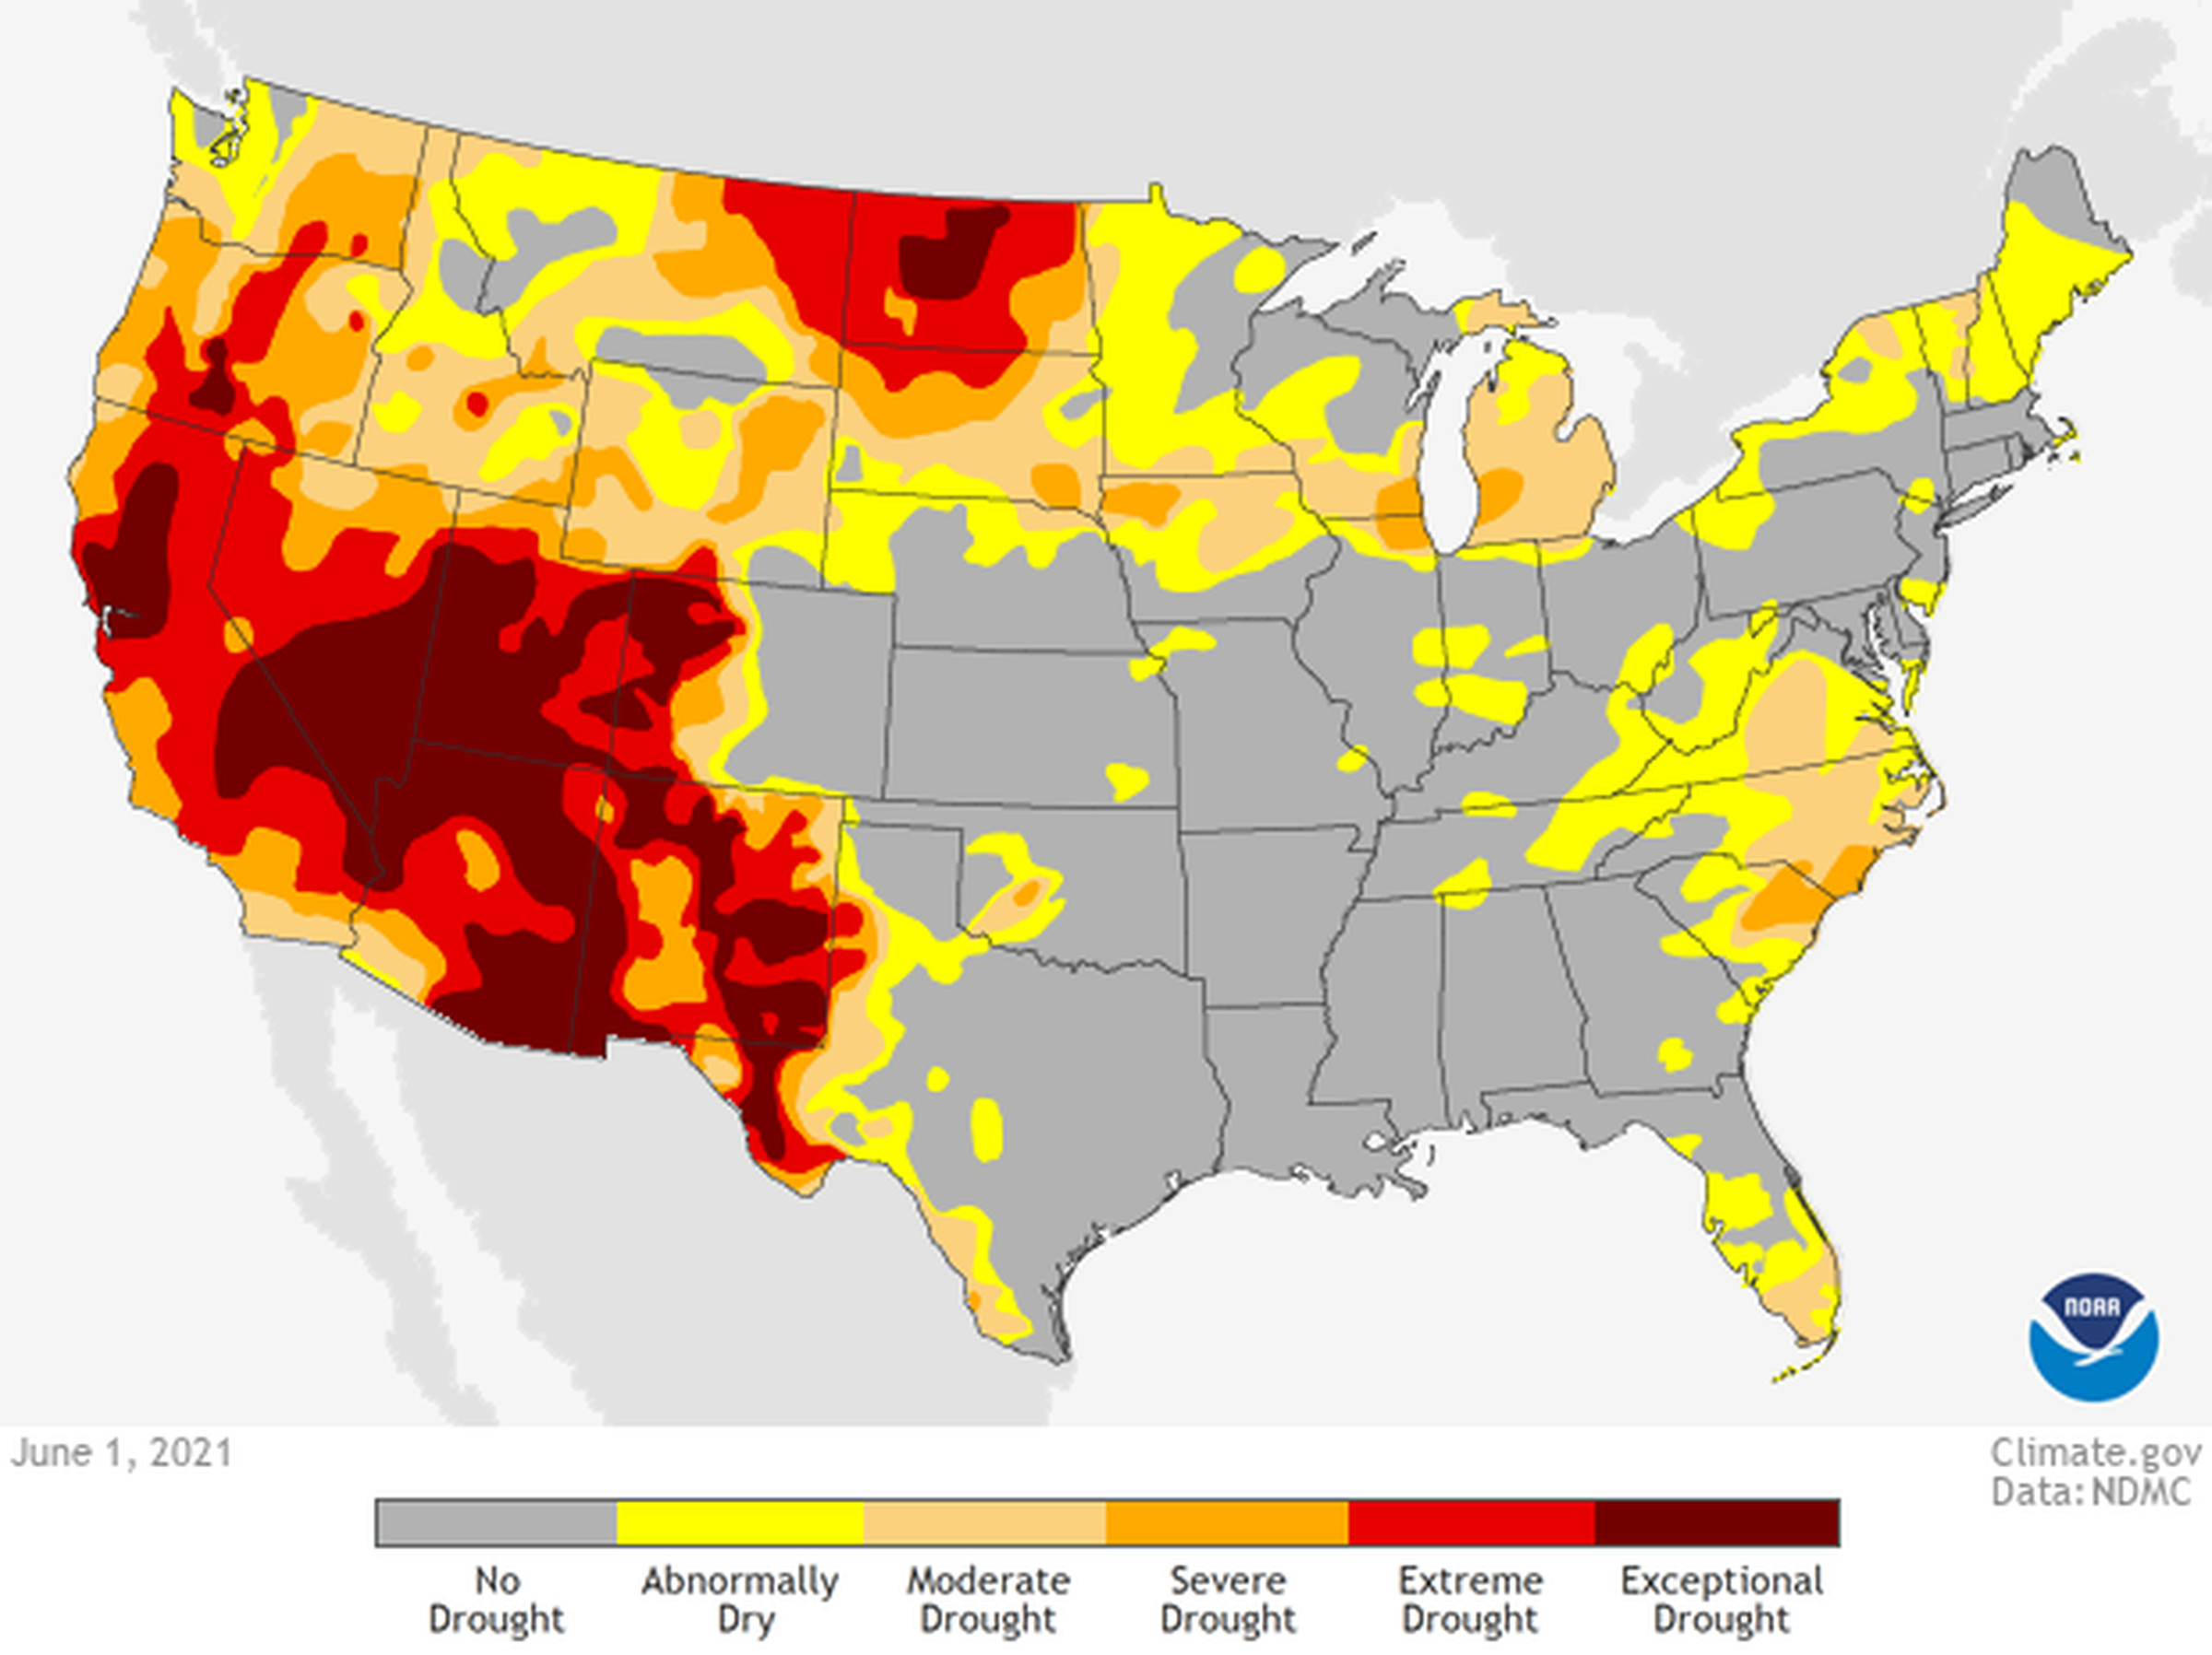 A snapshot of the National Oceanic and Atmospheric Administration Drought Monitor on June 1st, 2021.